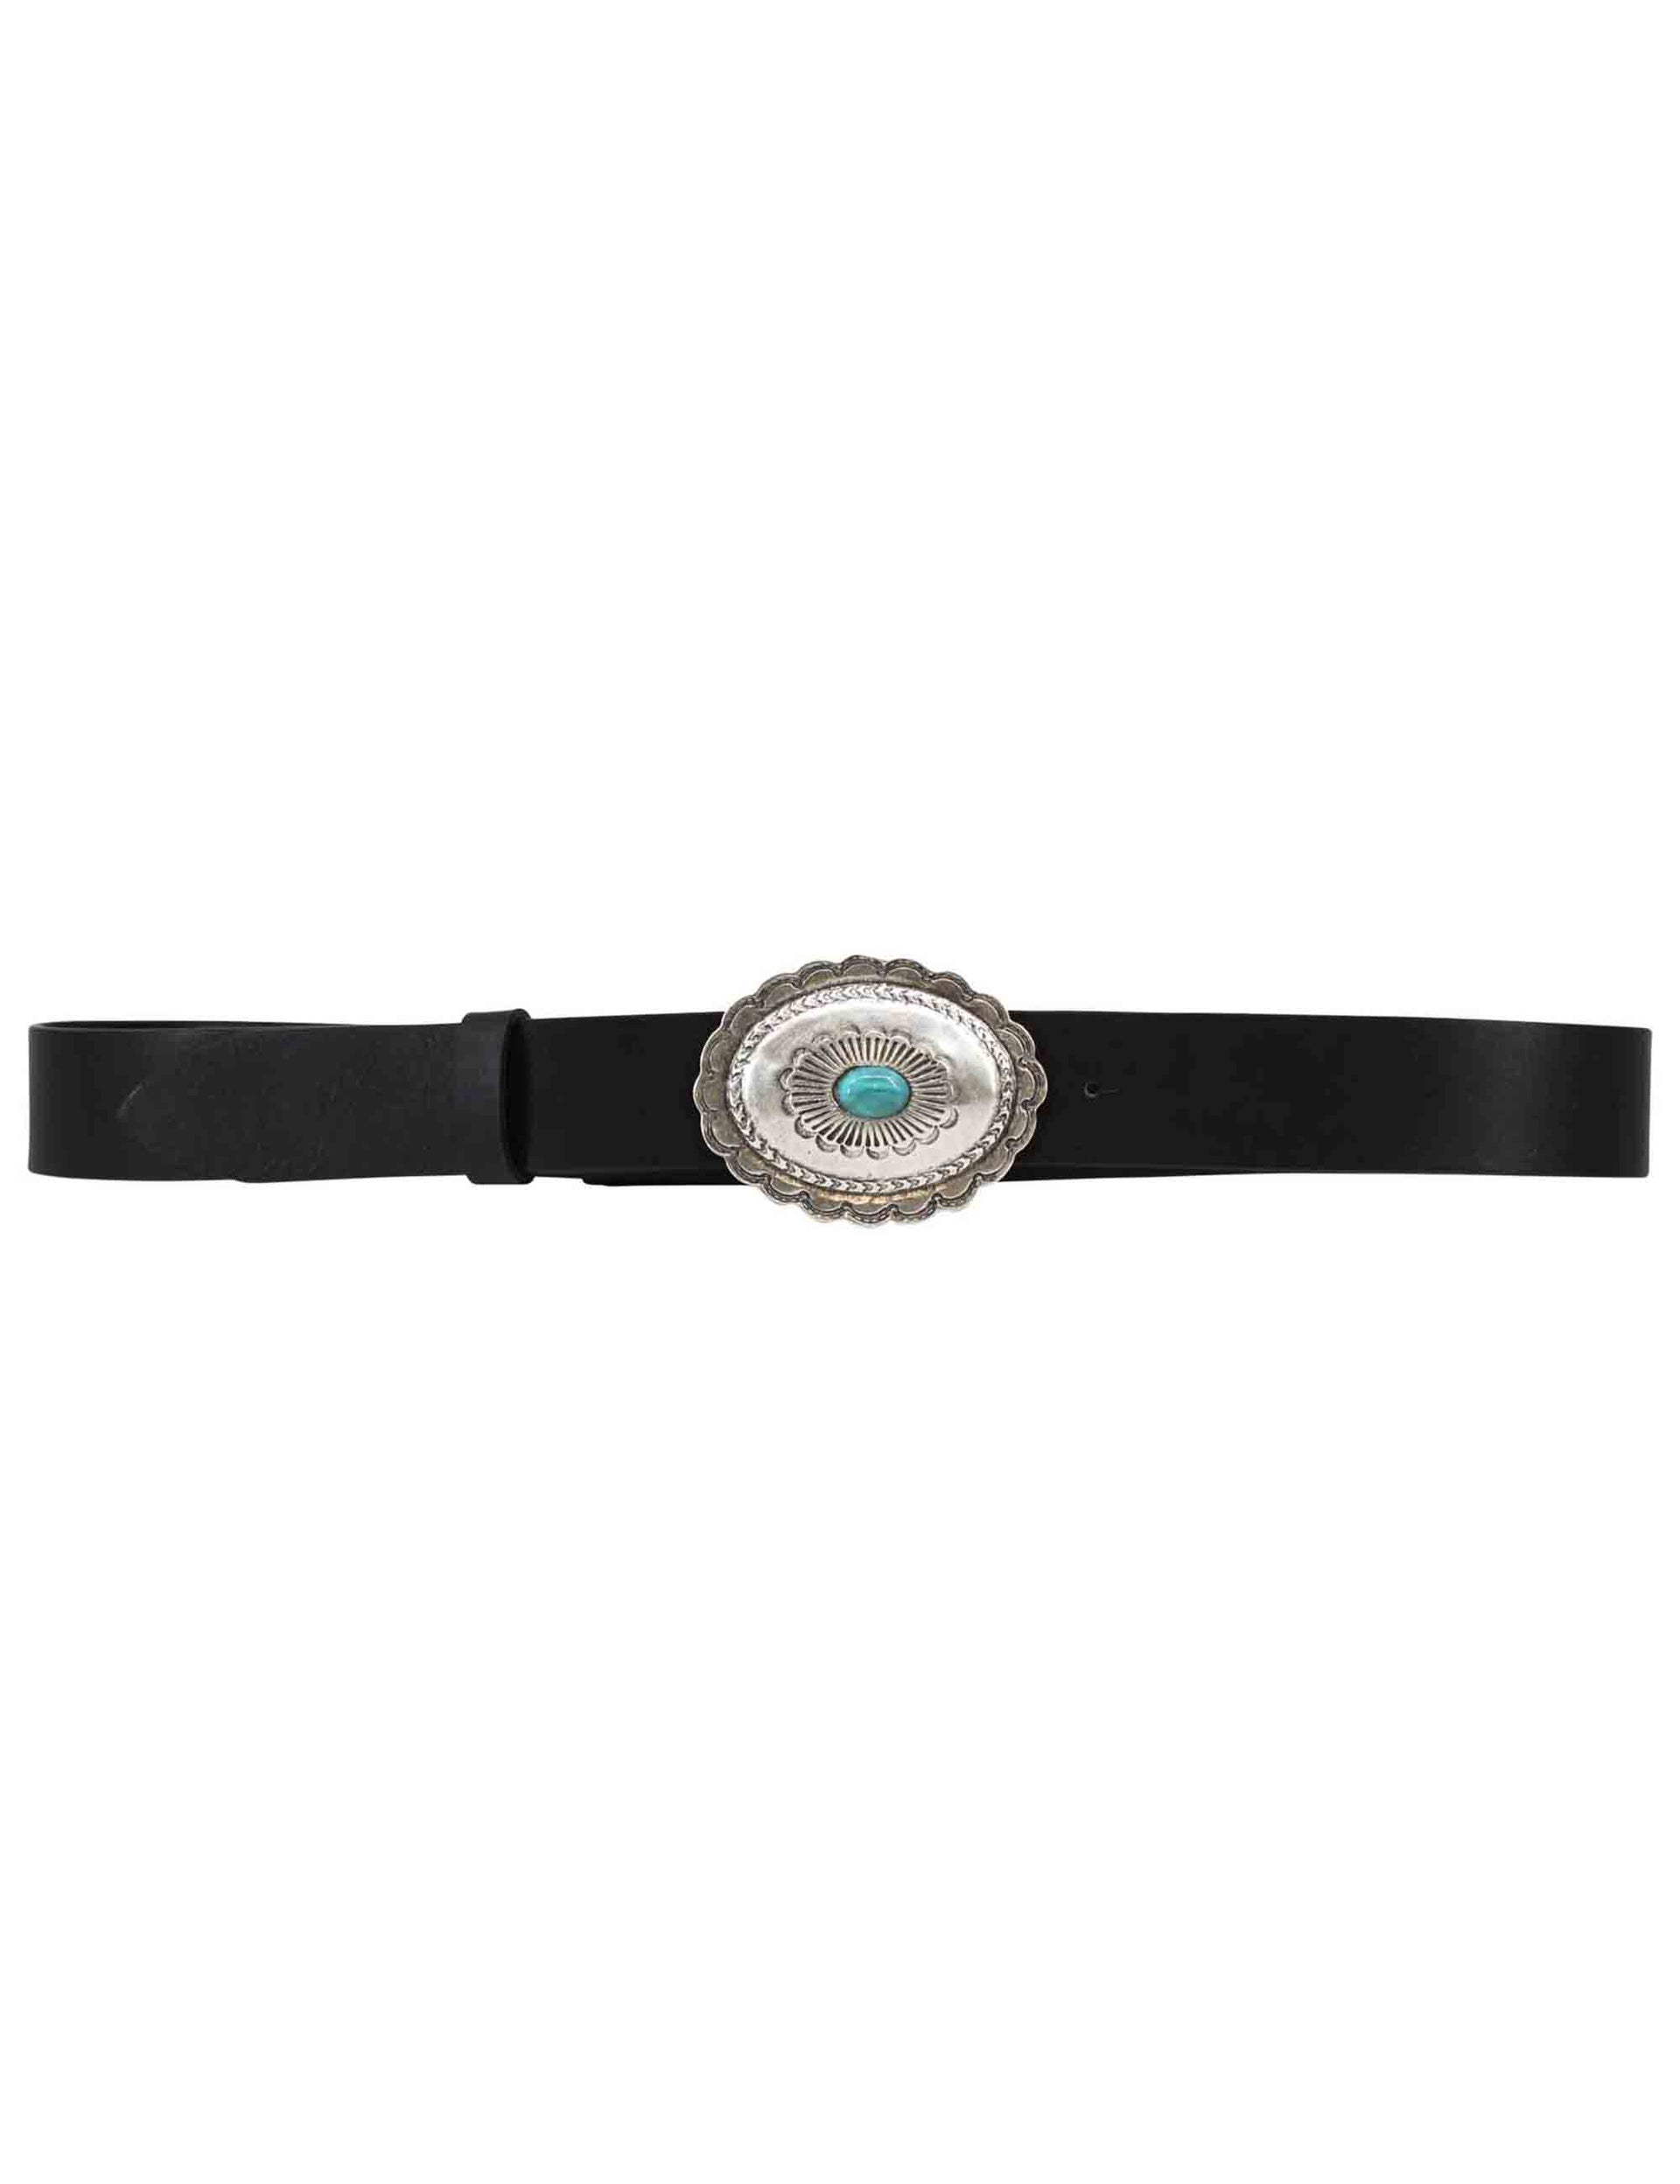 Women's black leather belts with silver and turquoise buckle